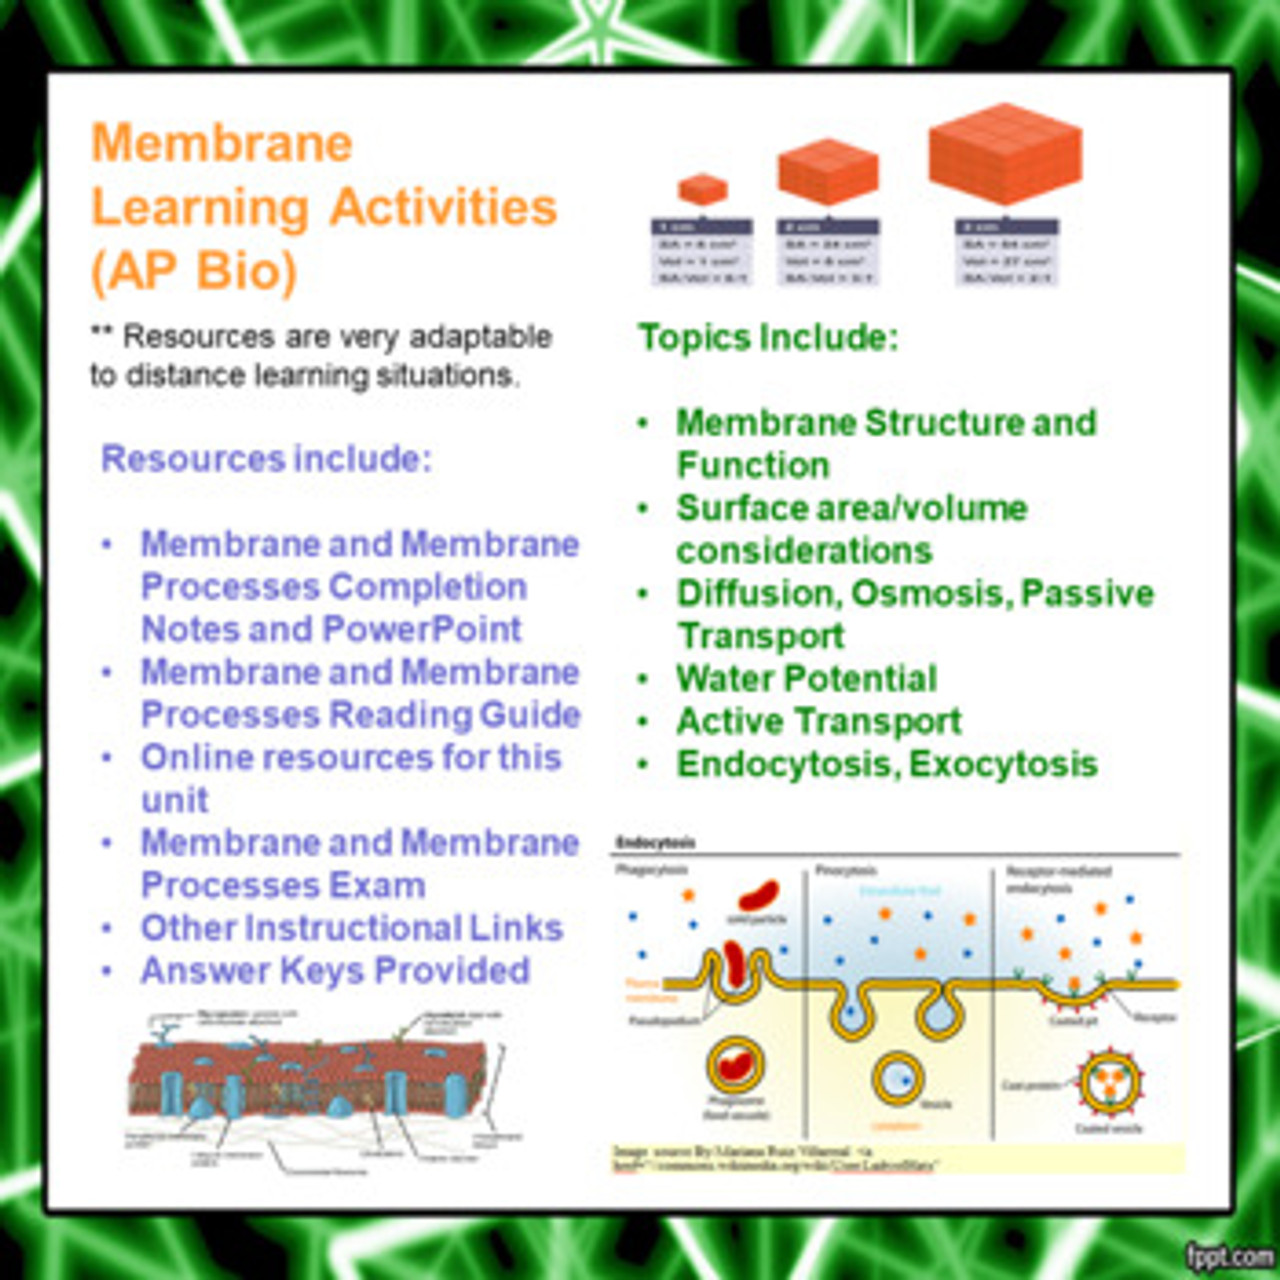 Membrane Learning Activities for AP Biology (Distance Learning